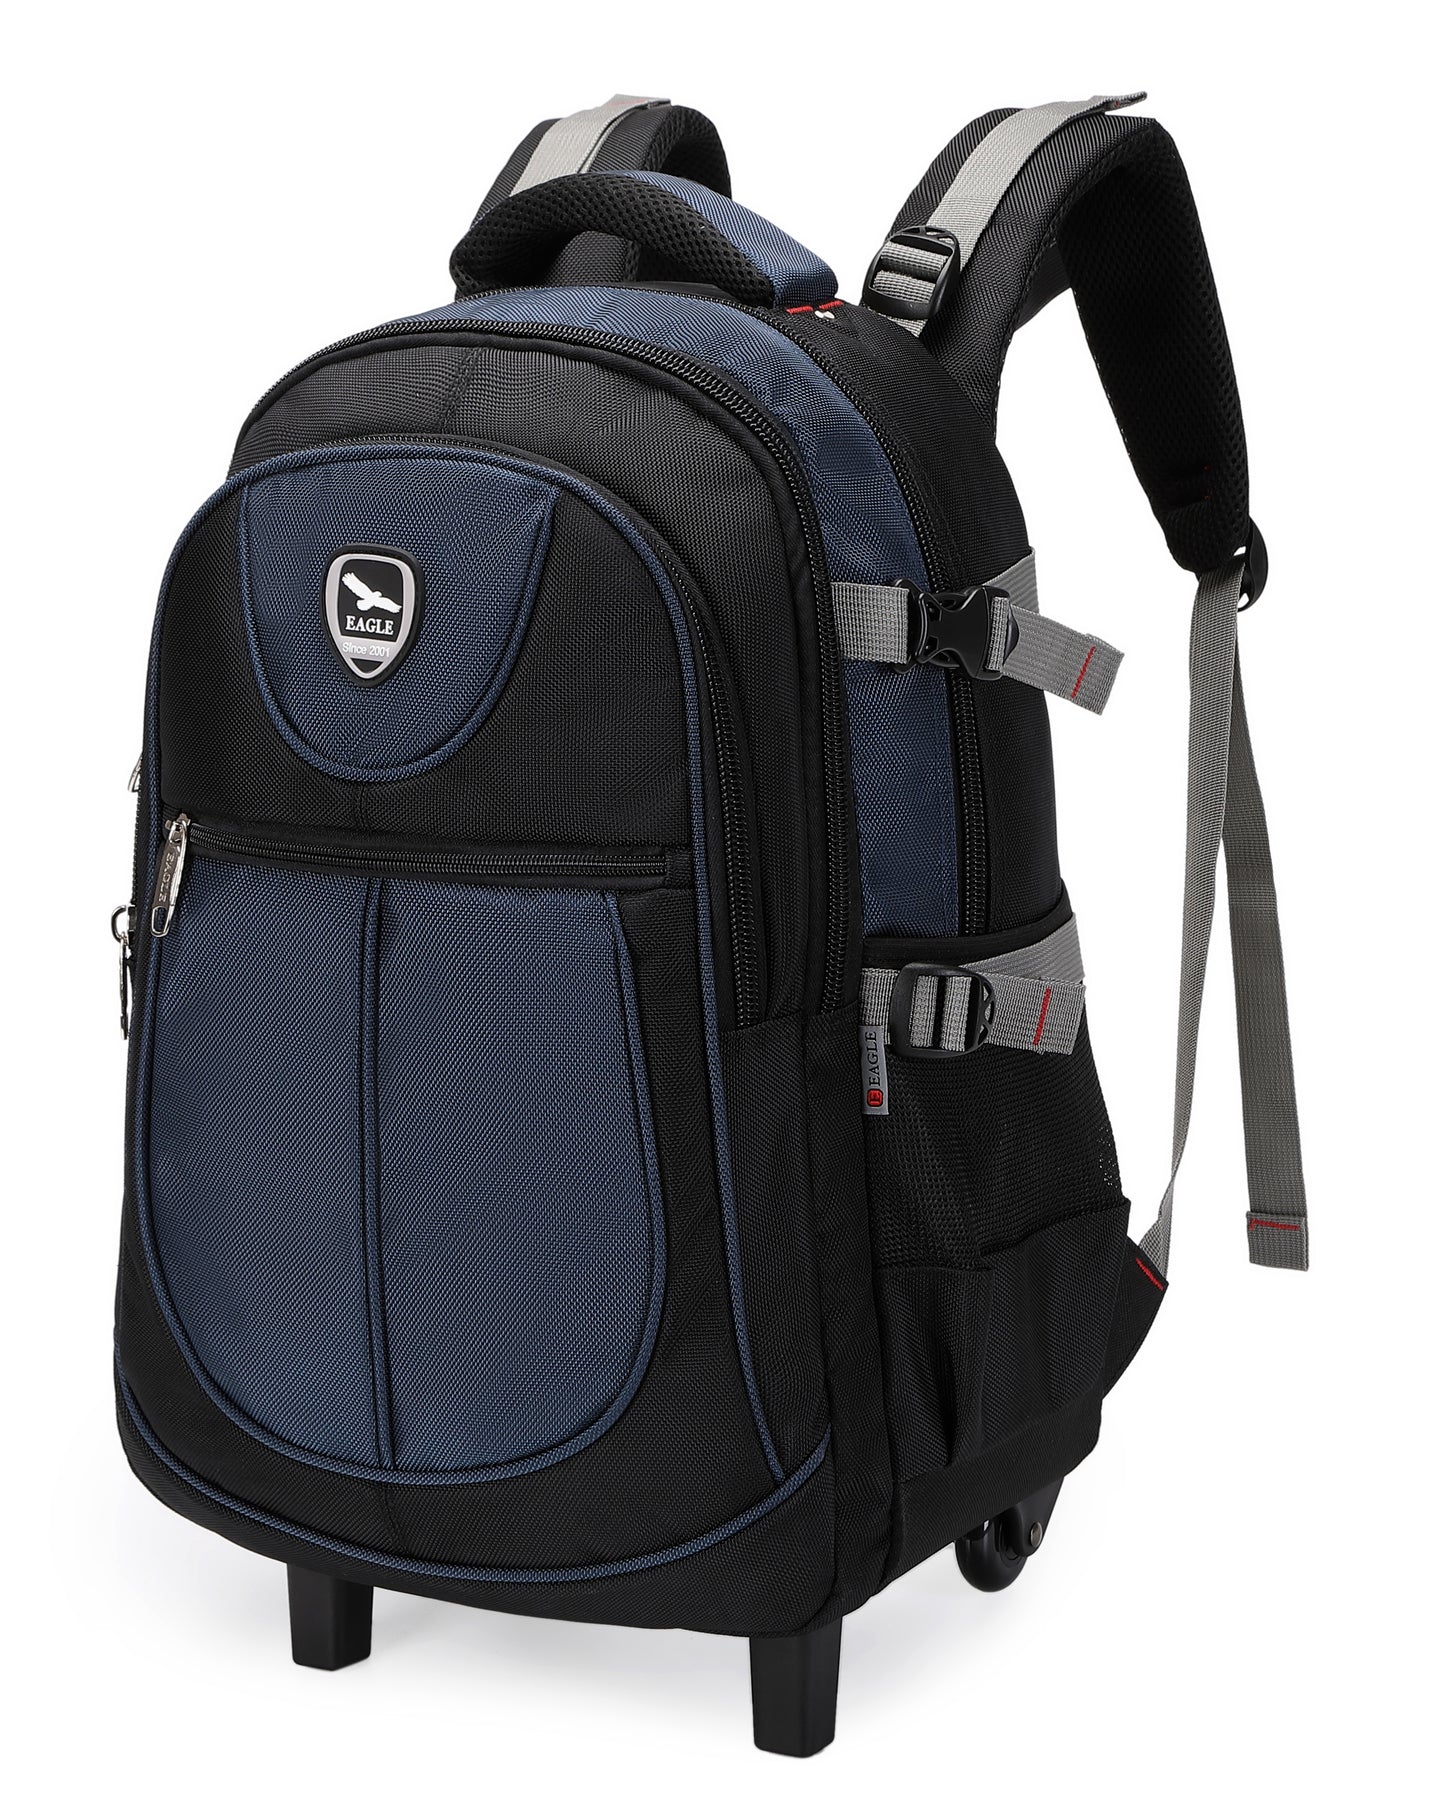 2in1 Laptop Backpack and Luggage with Wheels